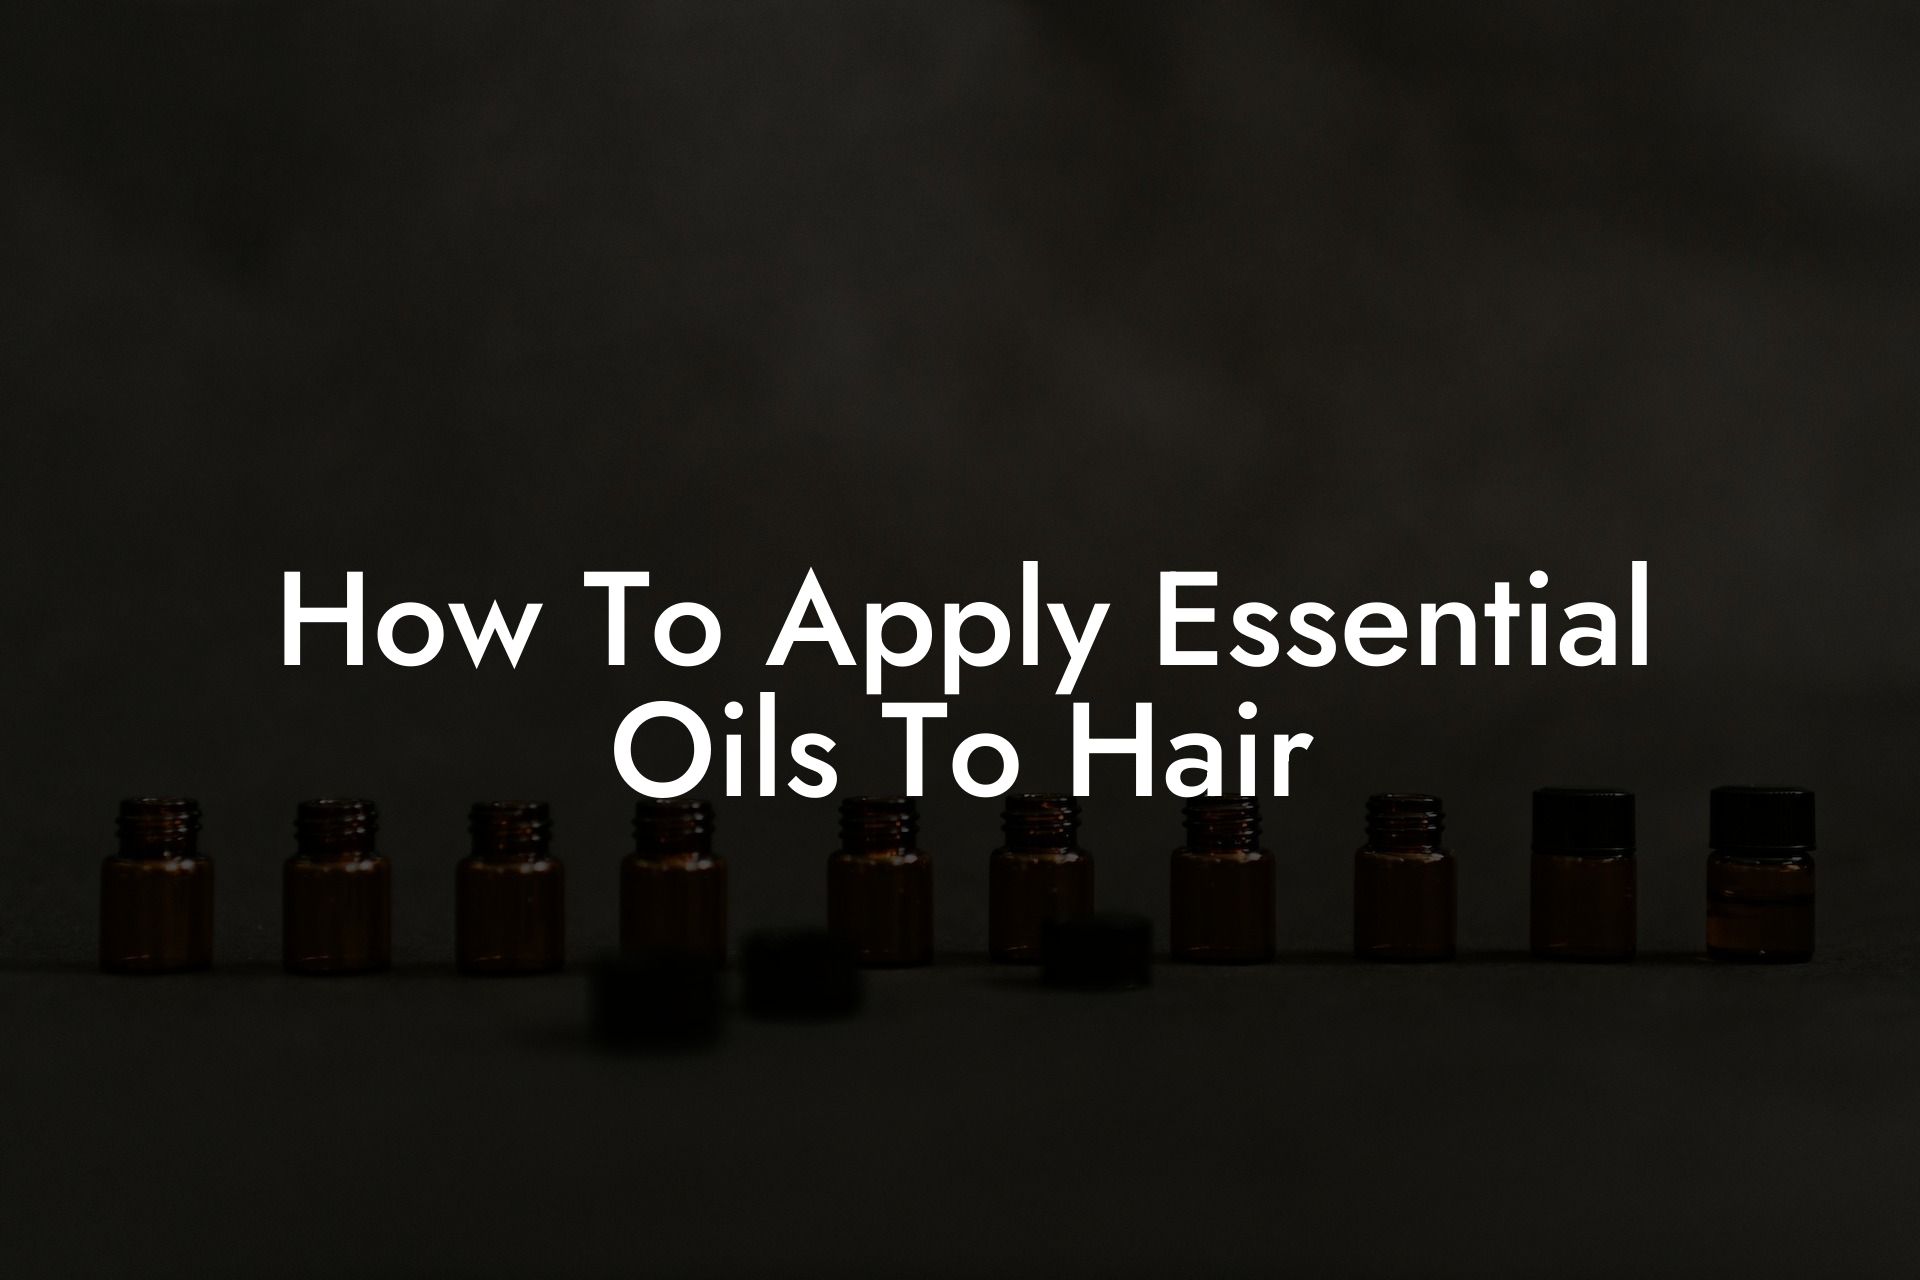 How To Apply Essential Oils To Hair